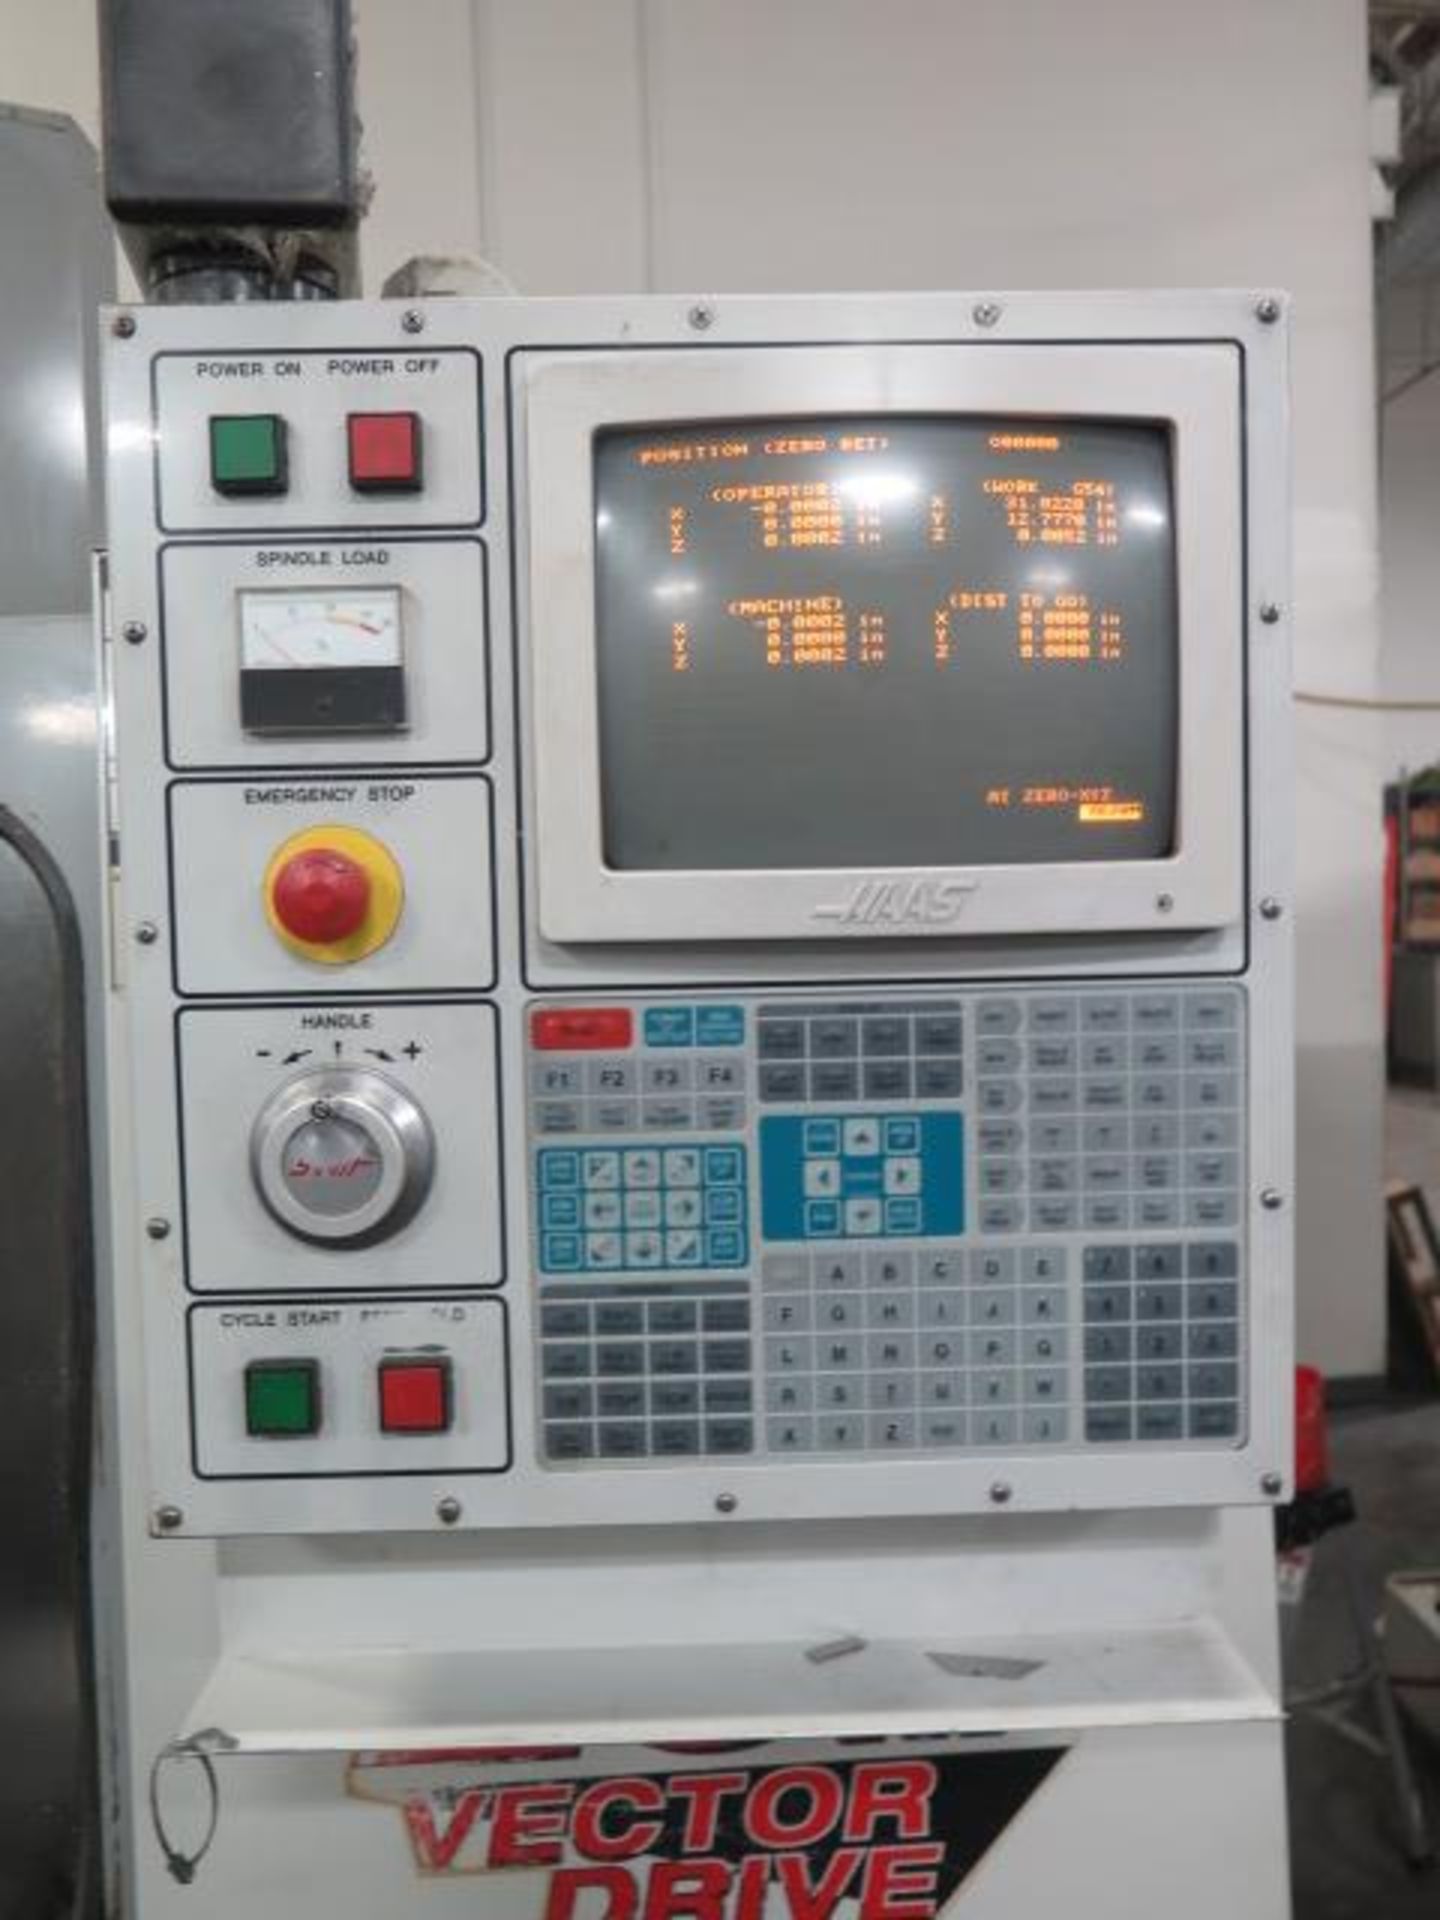 1999 Haas VF-3 4-Axis CNC VMC s/n 17438 w/ Haas Controls, 20-Station ATC, 7500 RPM, SOLD AS IS - Image 6 of 15